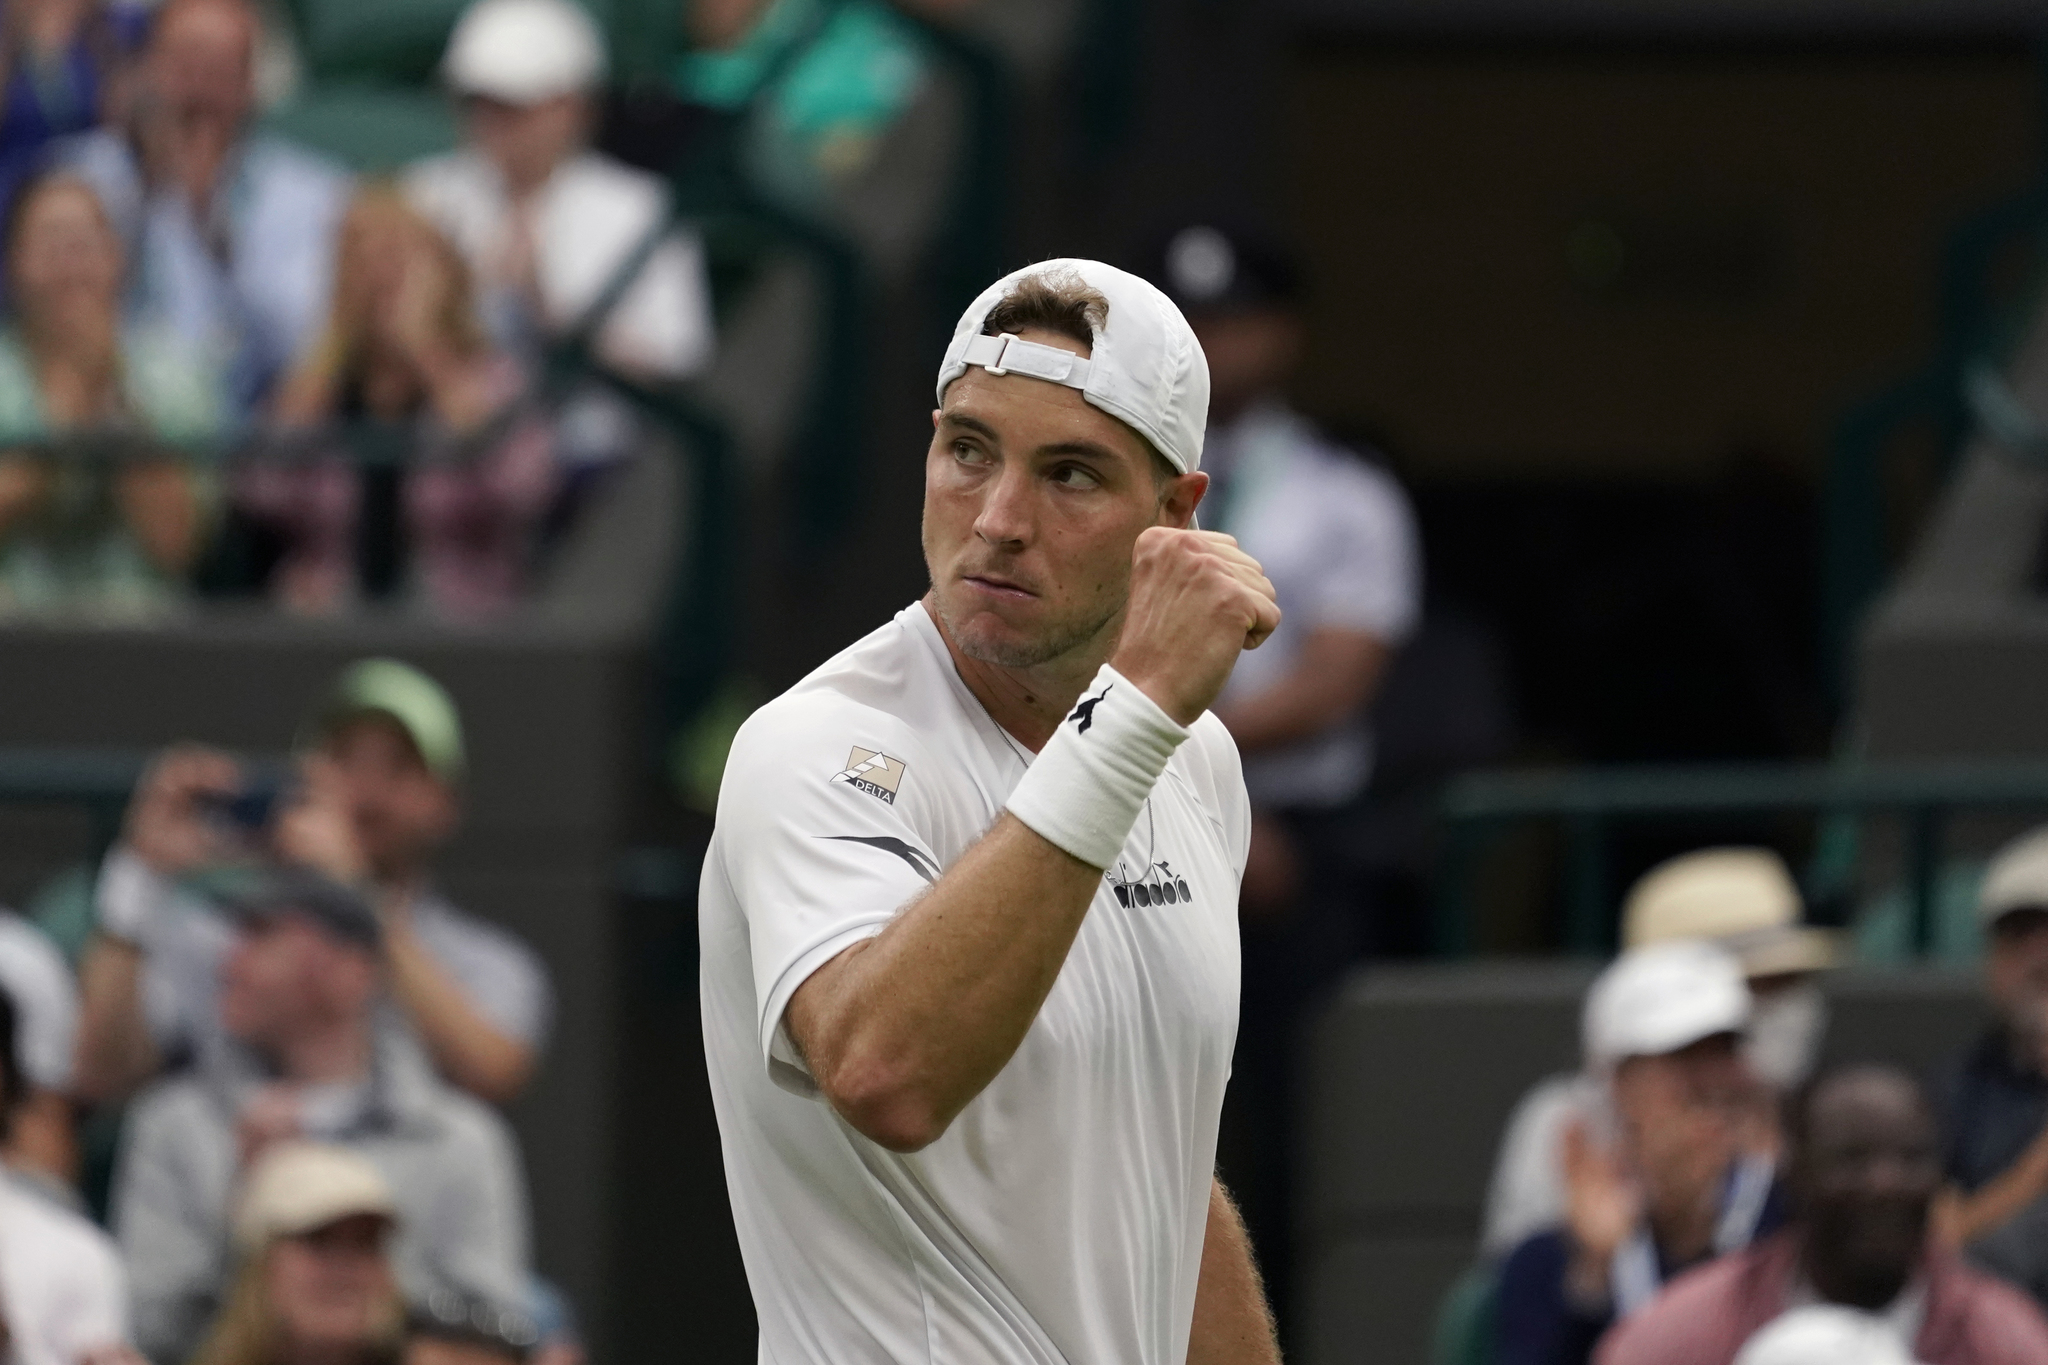 Germany's Jan-Lennard  lt;HIT gt;Struff lt;/HIT gt; reacts after winning a point against Spain's Carlos Alcaraz during their men's singles tennis match on day one of the Wimbledon tennis championships in London, Monday, June 27, 2022. (AP Photo/Alberto Pezzali)